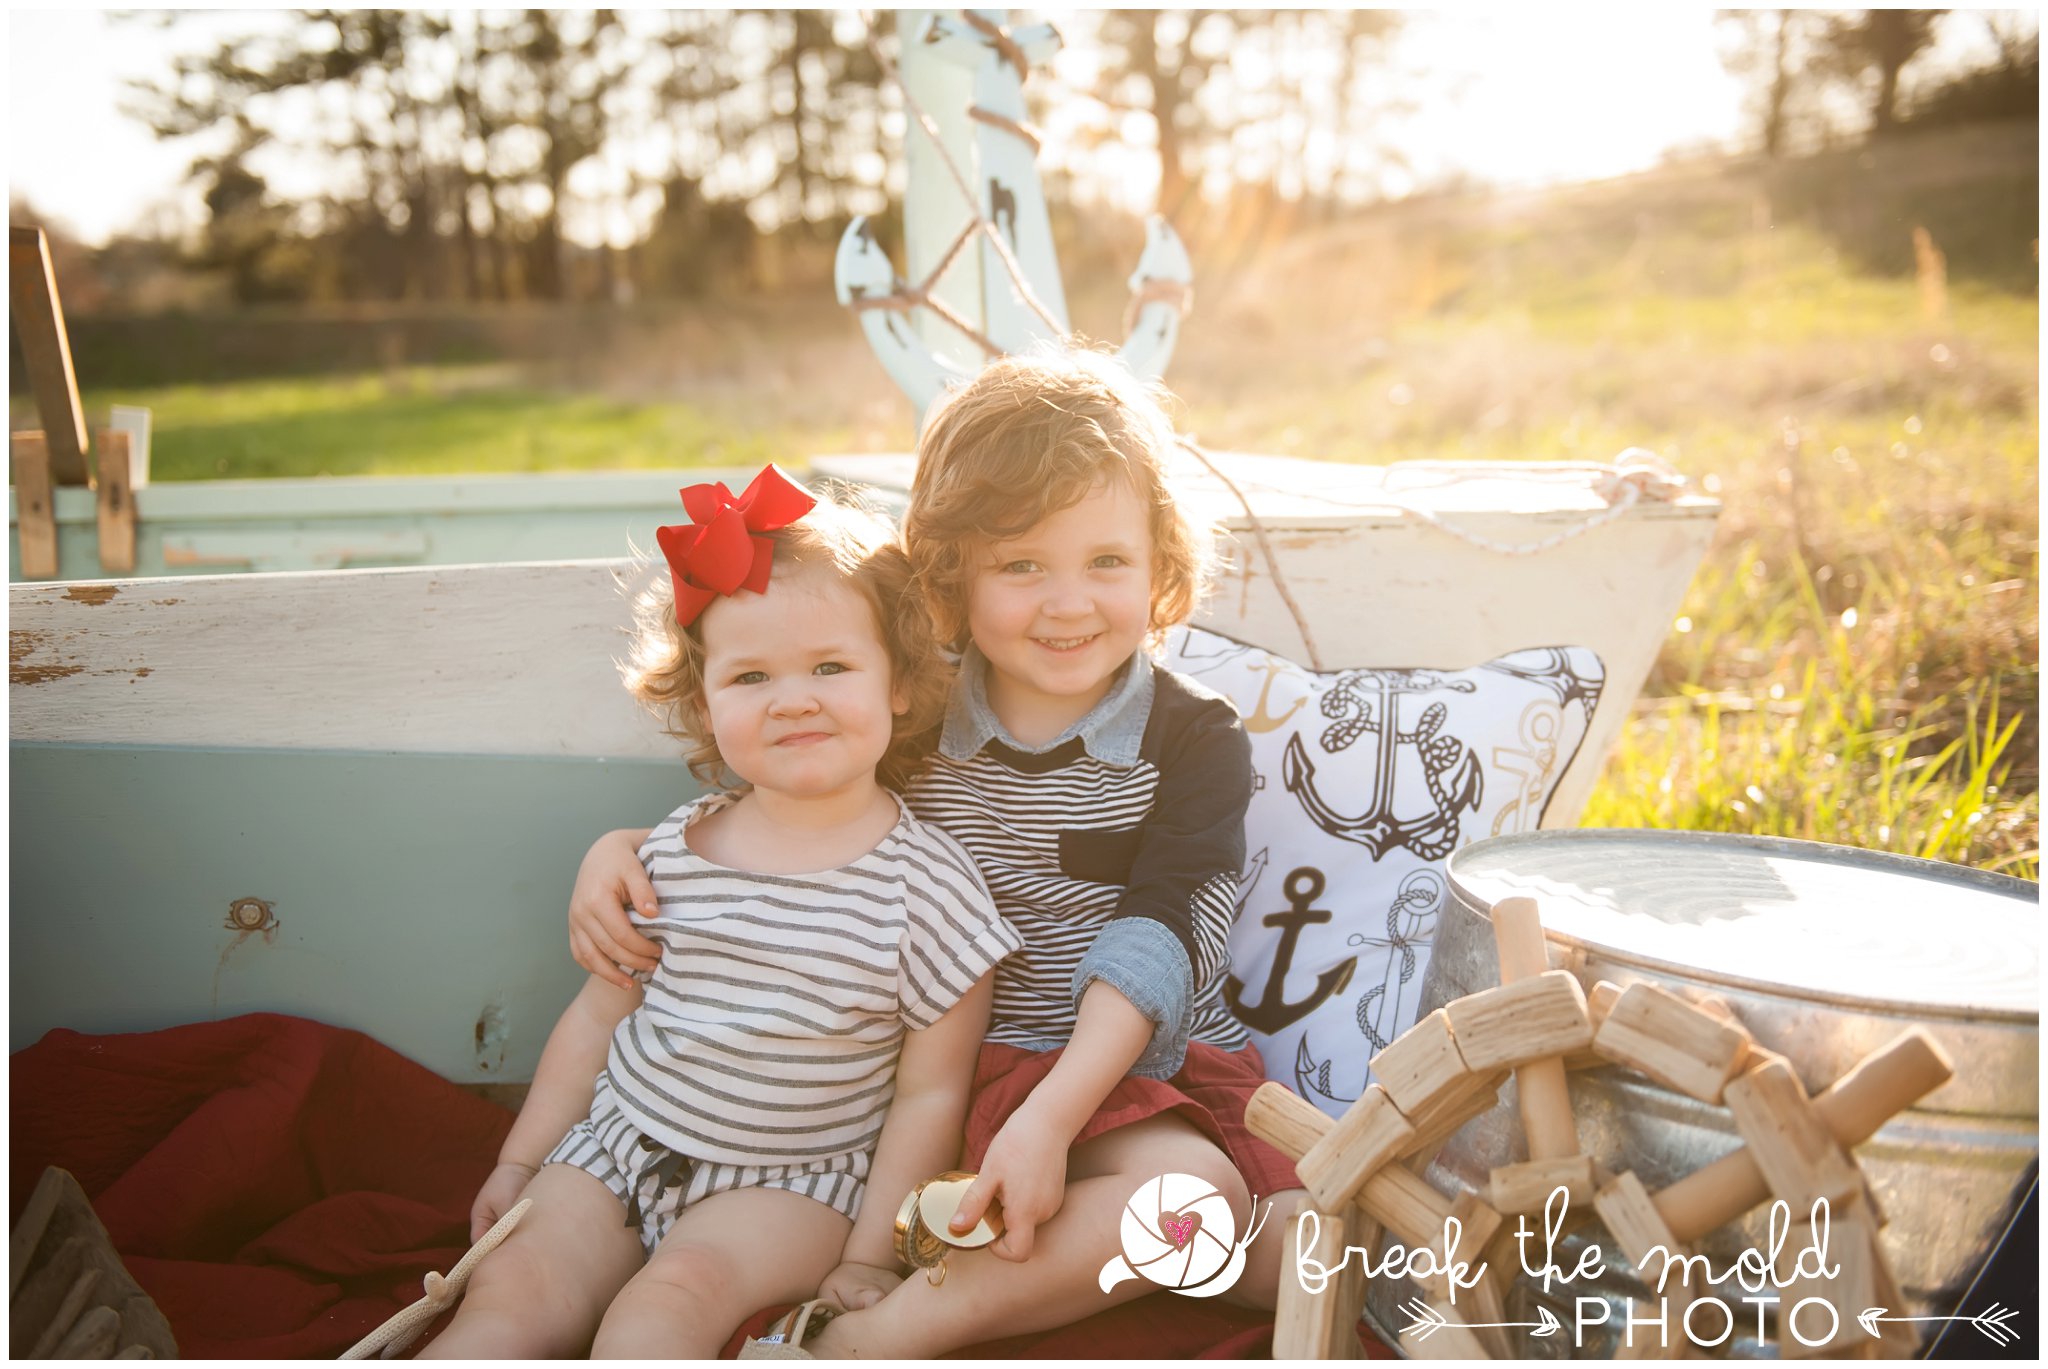 break-the-mold-photo-nautical-themed-mini-sessions-knoxville_3889.jpg